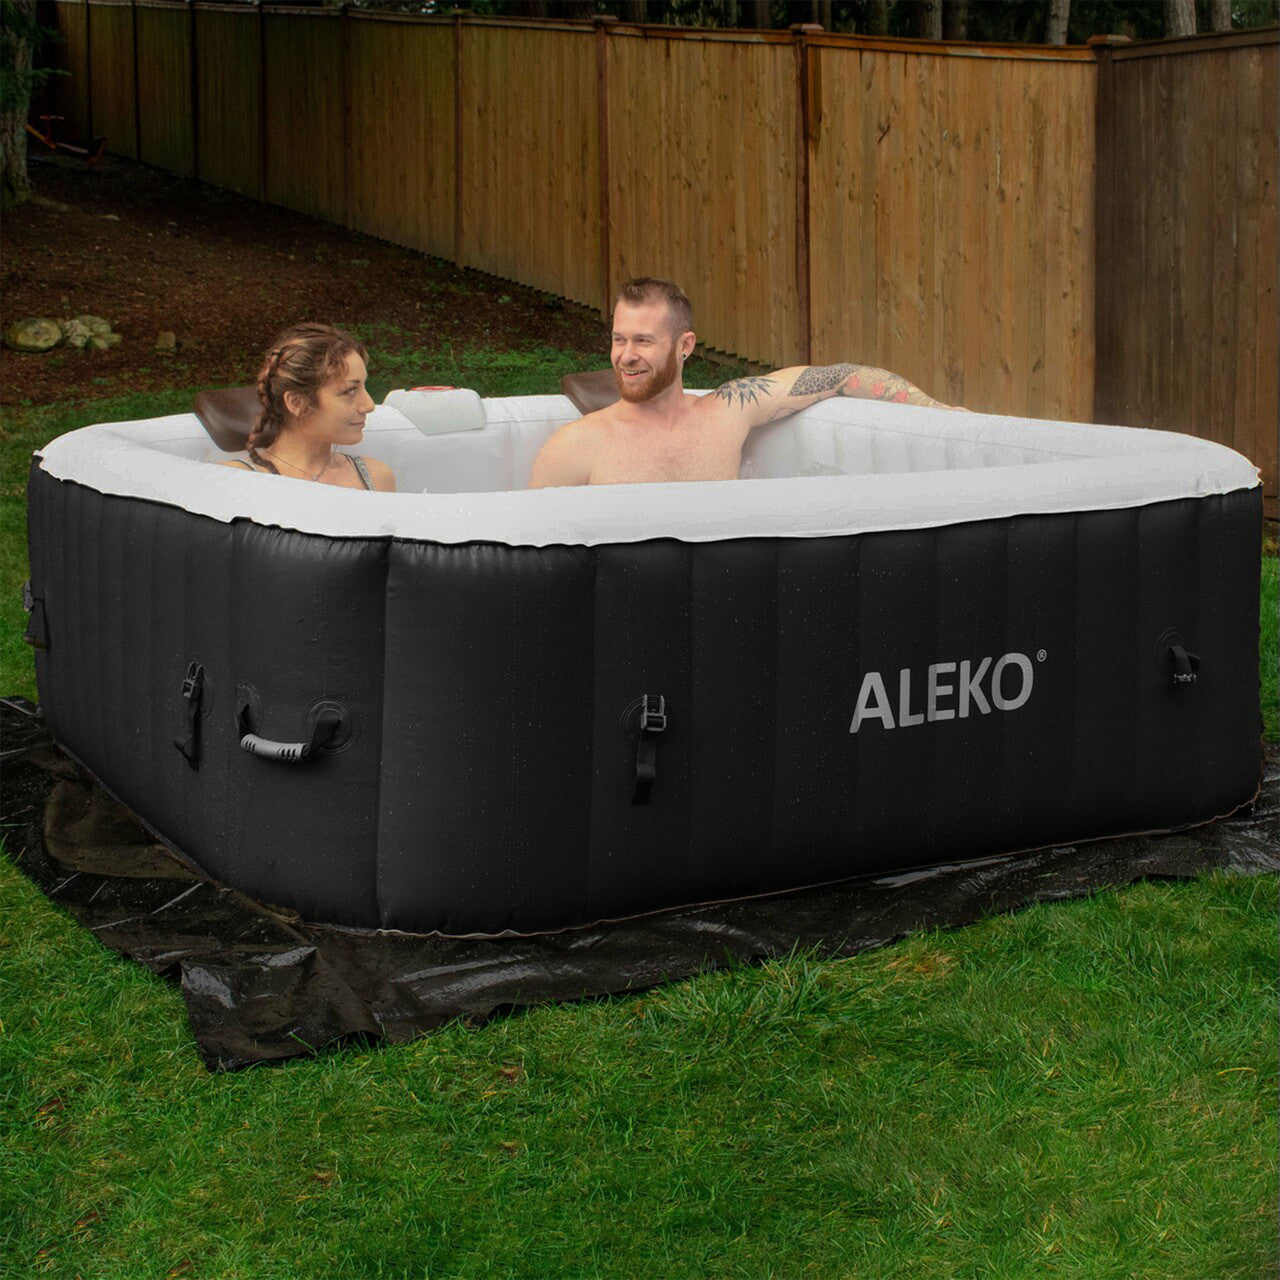 Inflatable Jetted 6-Person Square Hot Tub & Cover - 250 gal